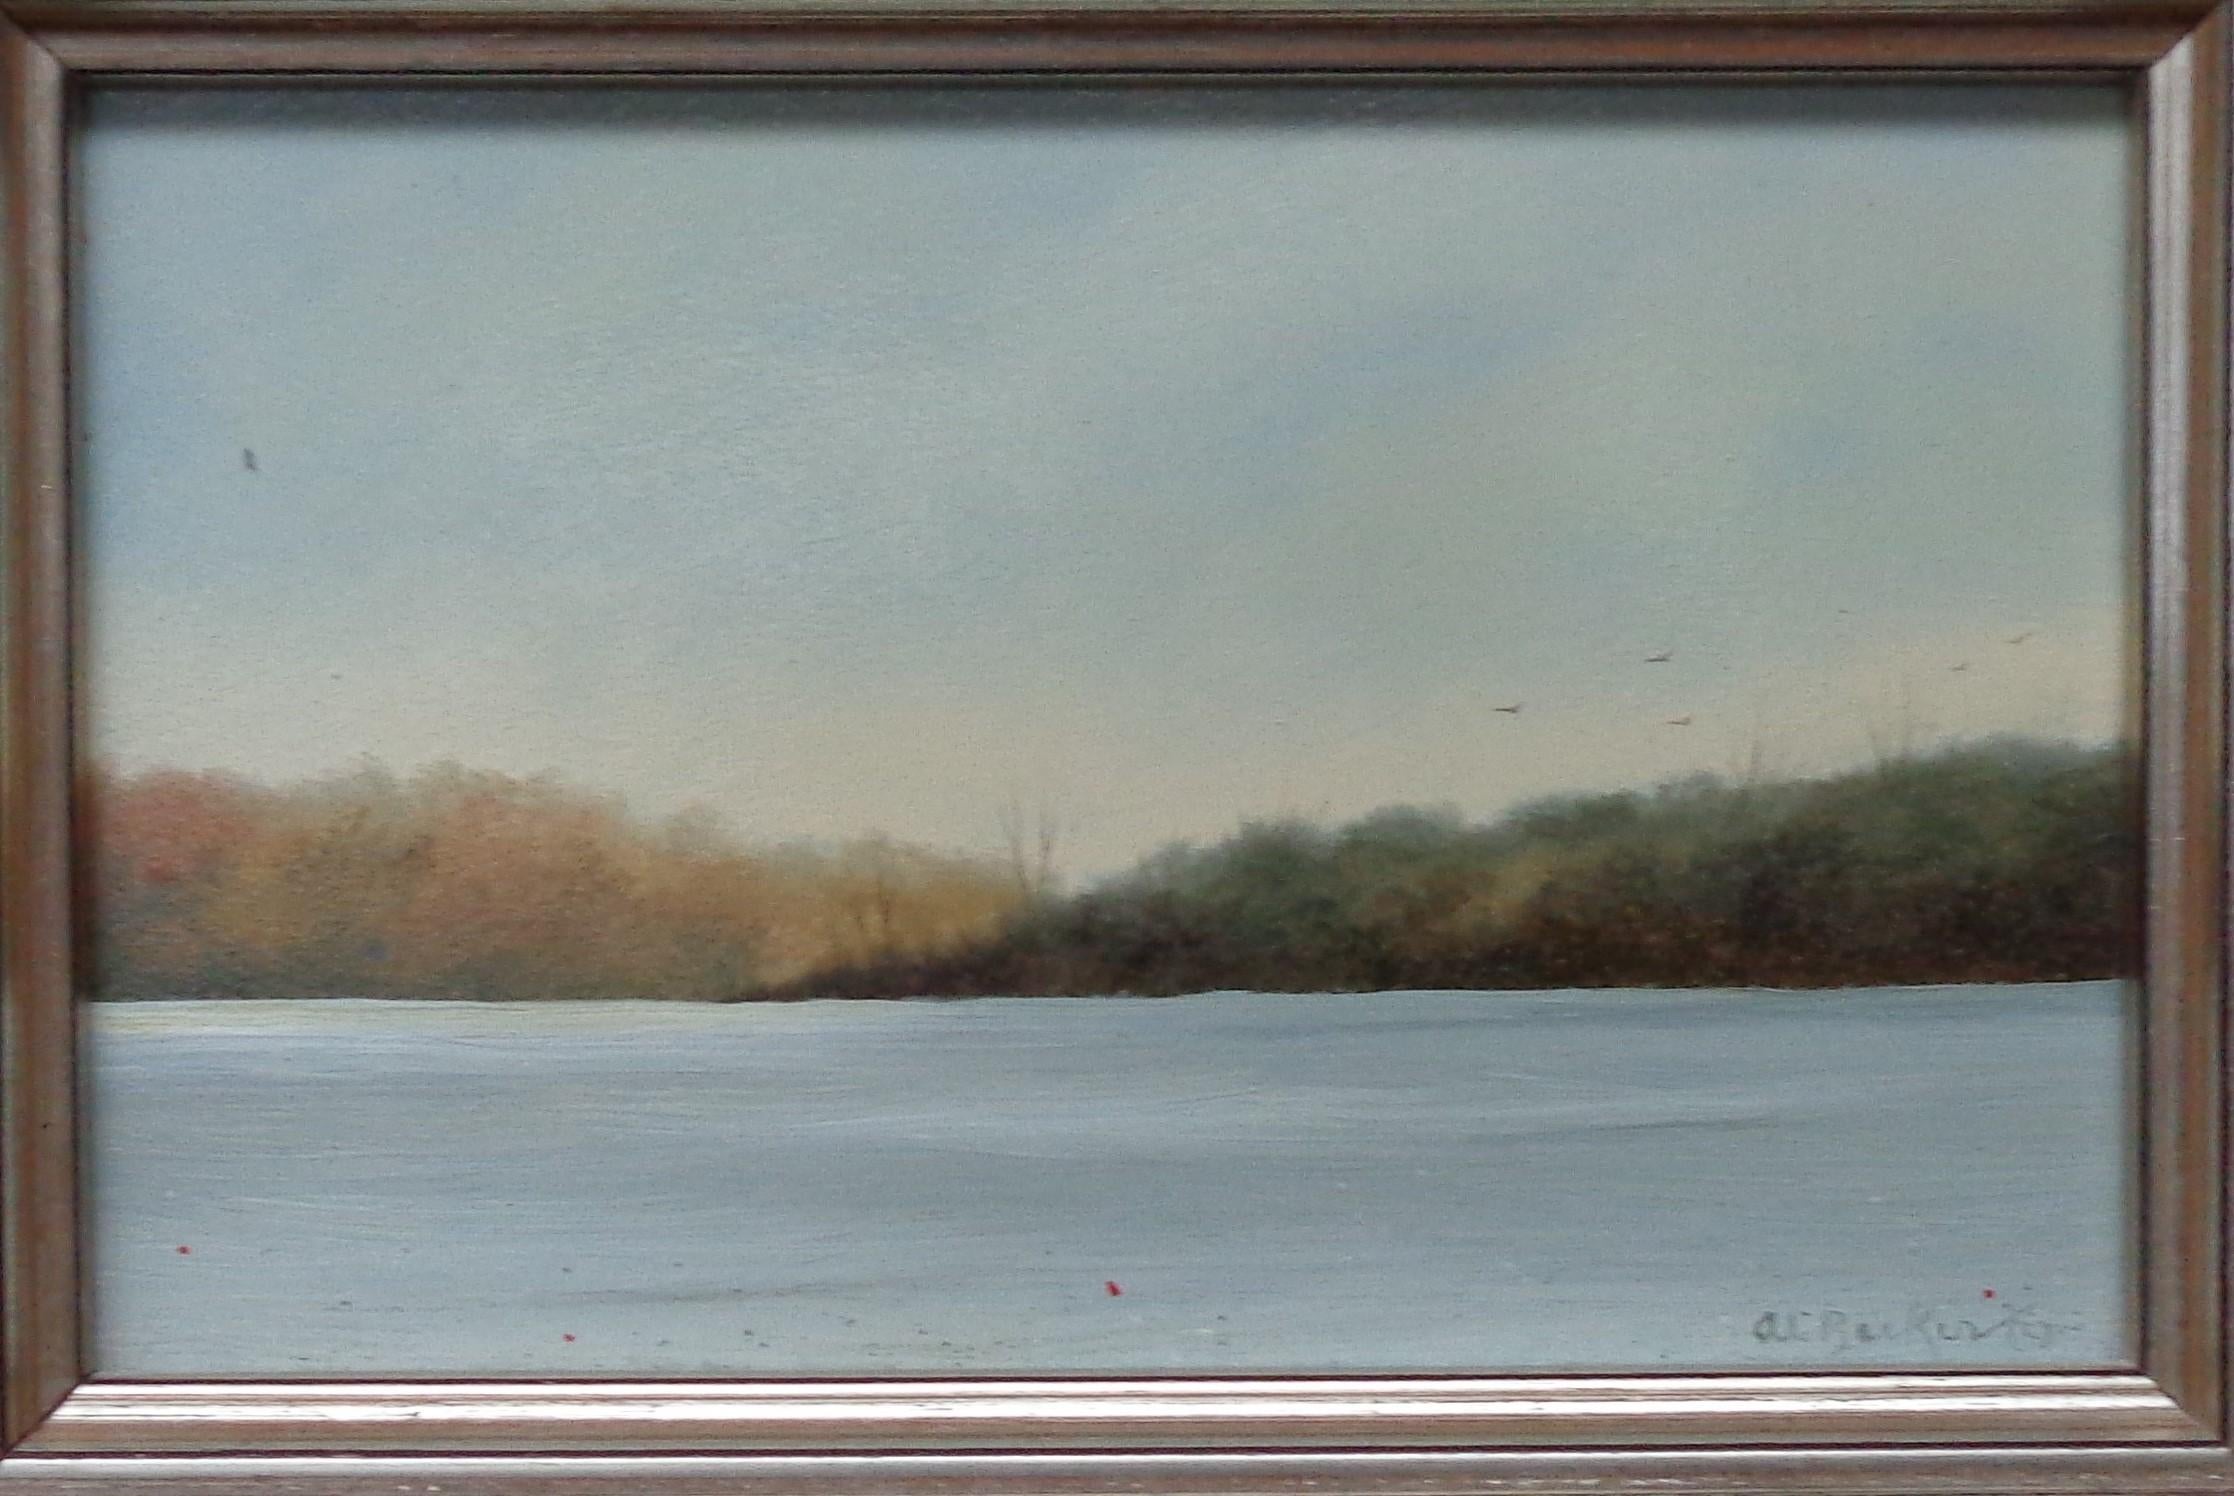 Here are a pair of paintings by Bordentown artists Al Baker. Smaller of the two is a winter scene. Sky has a small spot on left side. The other painting measuring 8.5 x 13.5 framed is a seascape done in 2006. The painting is in good condition but